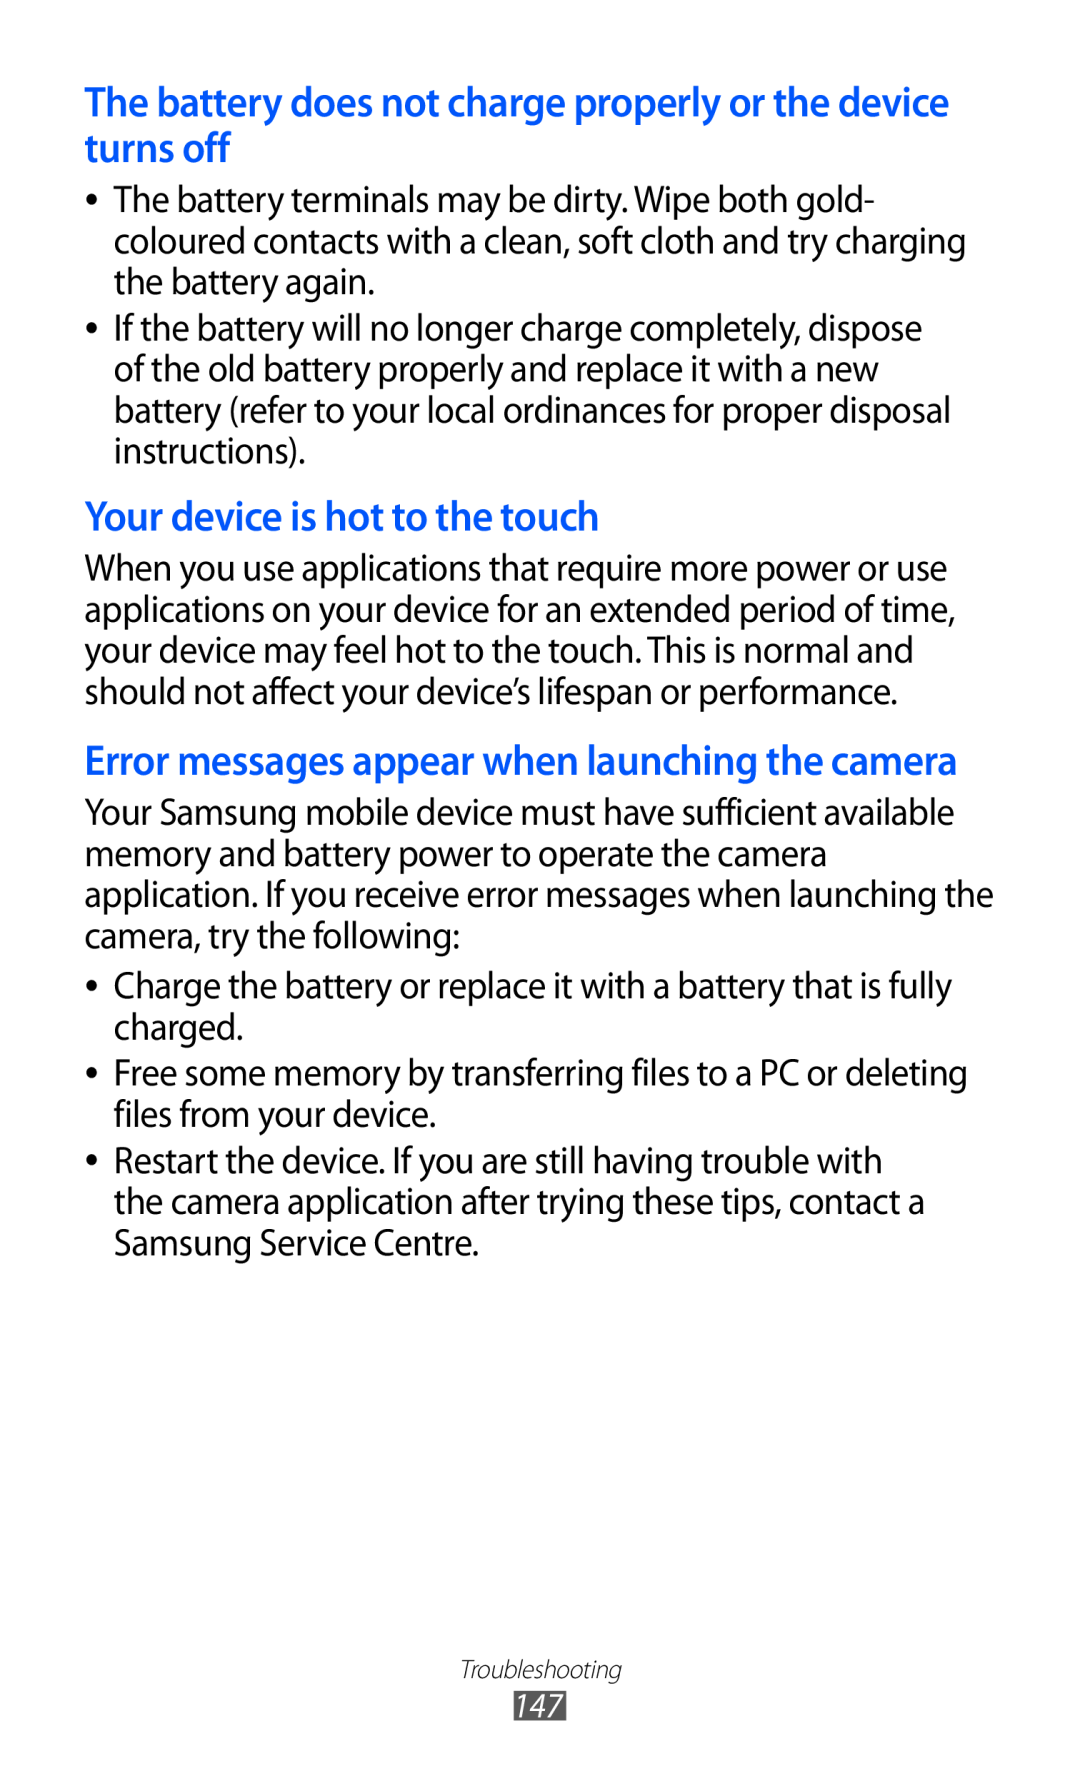 Samsung GT-I9070 user manual The battery does not charge properly or the device turns off, Your device is hot to the touch 